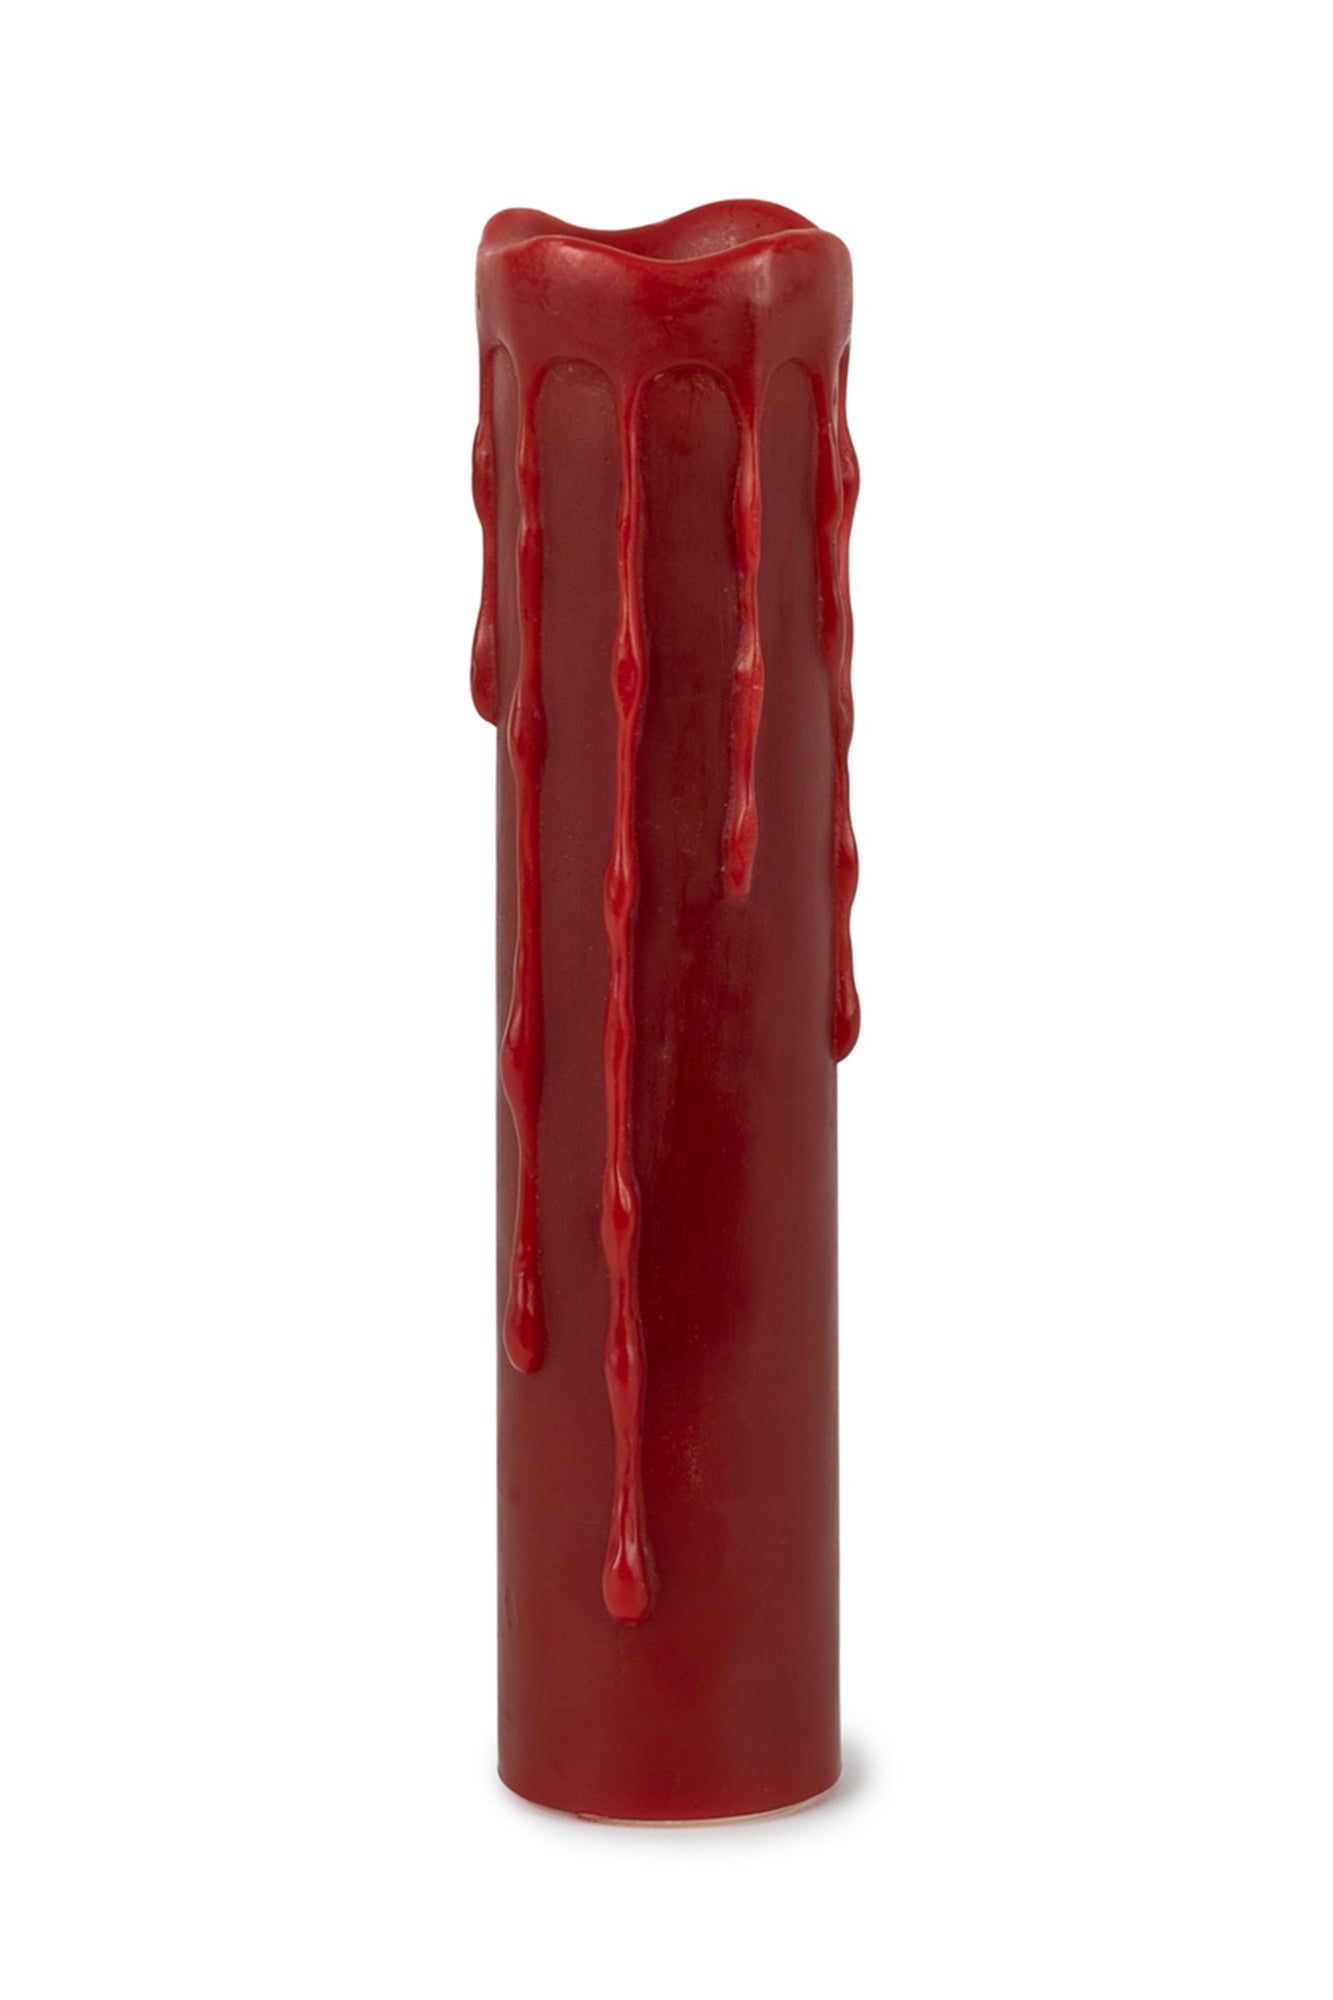 LED Wax Dripping Pillar Candle w/ remote (Set of 2)